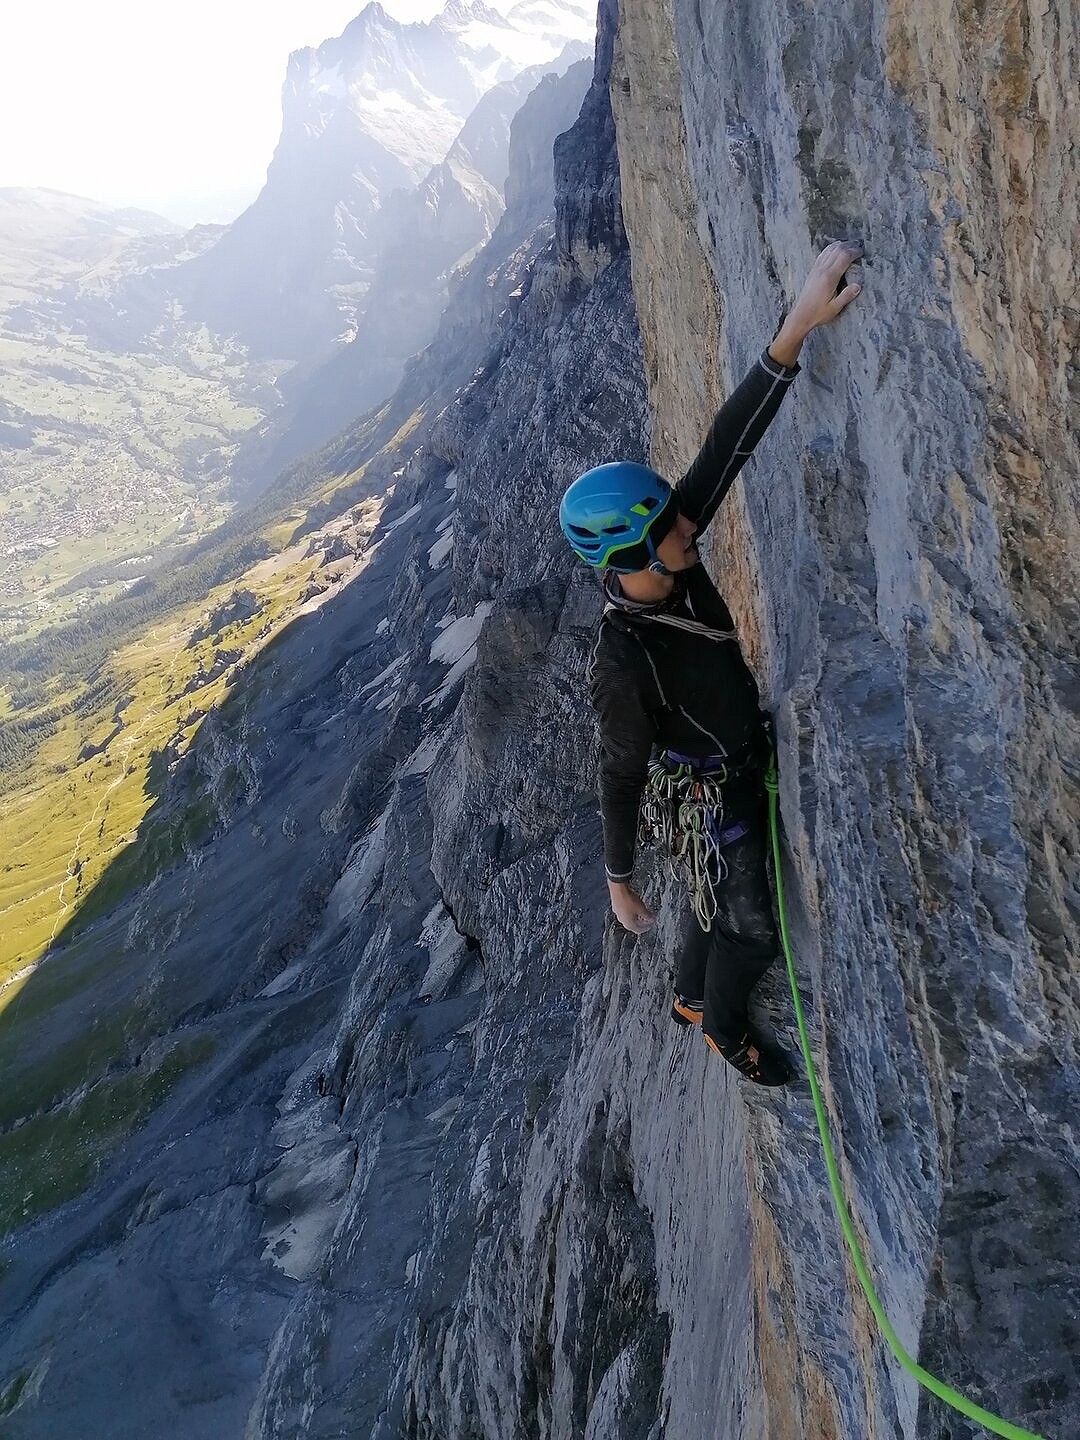 Sebastian shaking out on the first crux (7b+)   © Freja Shannon